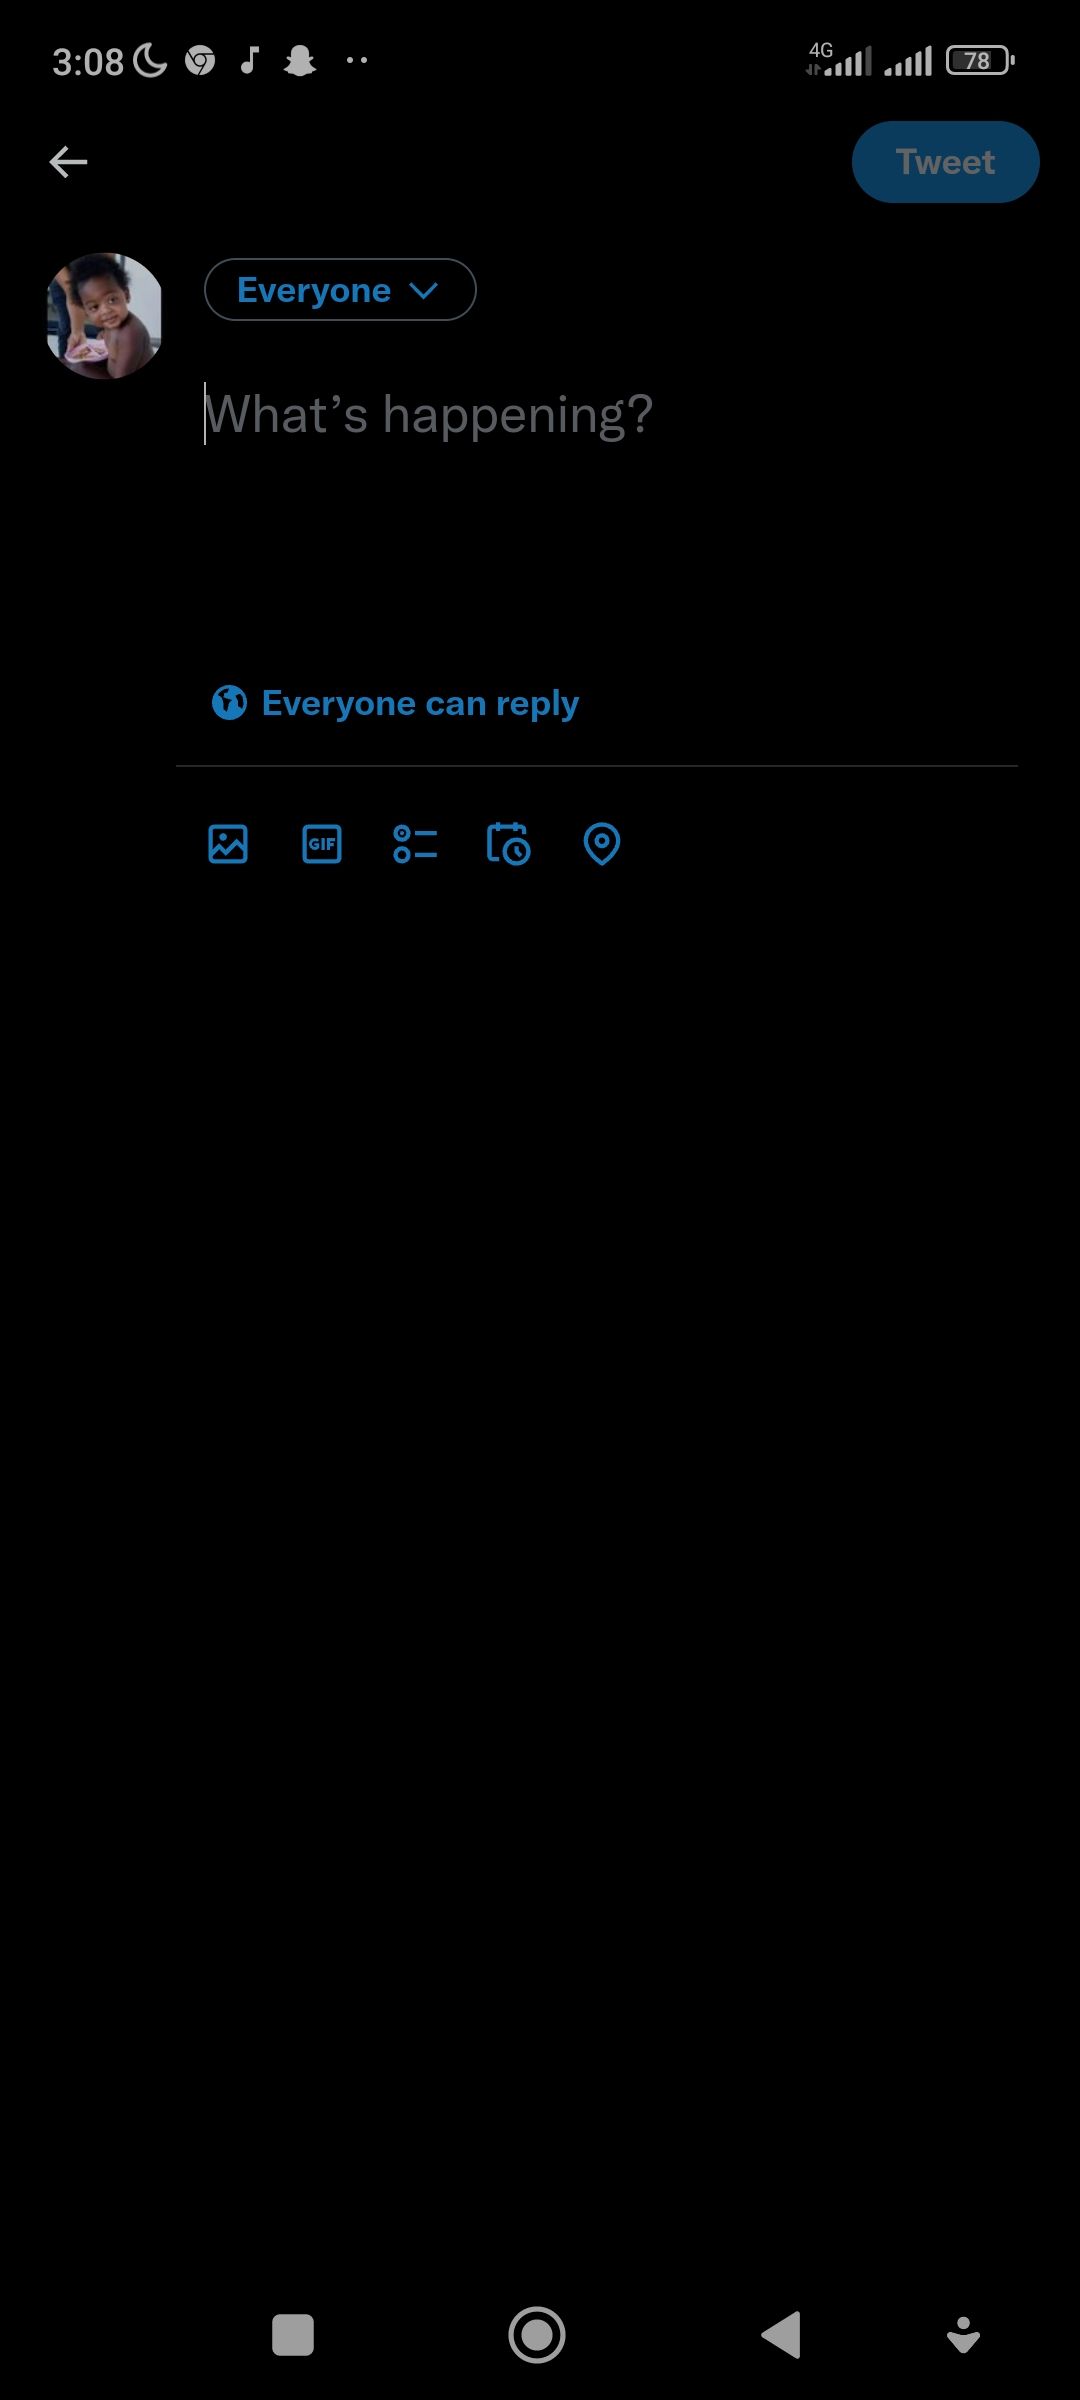 Twitter text box for new tweets